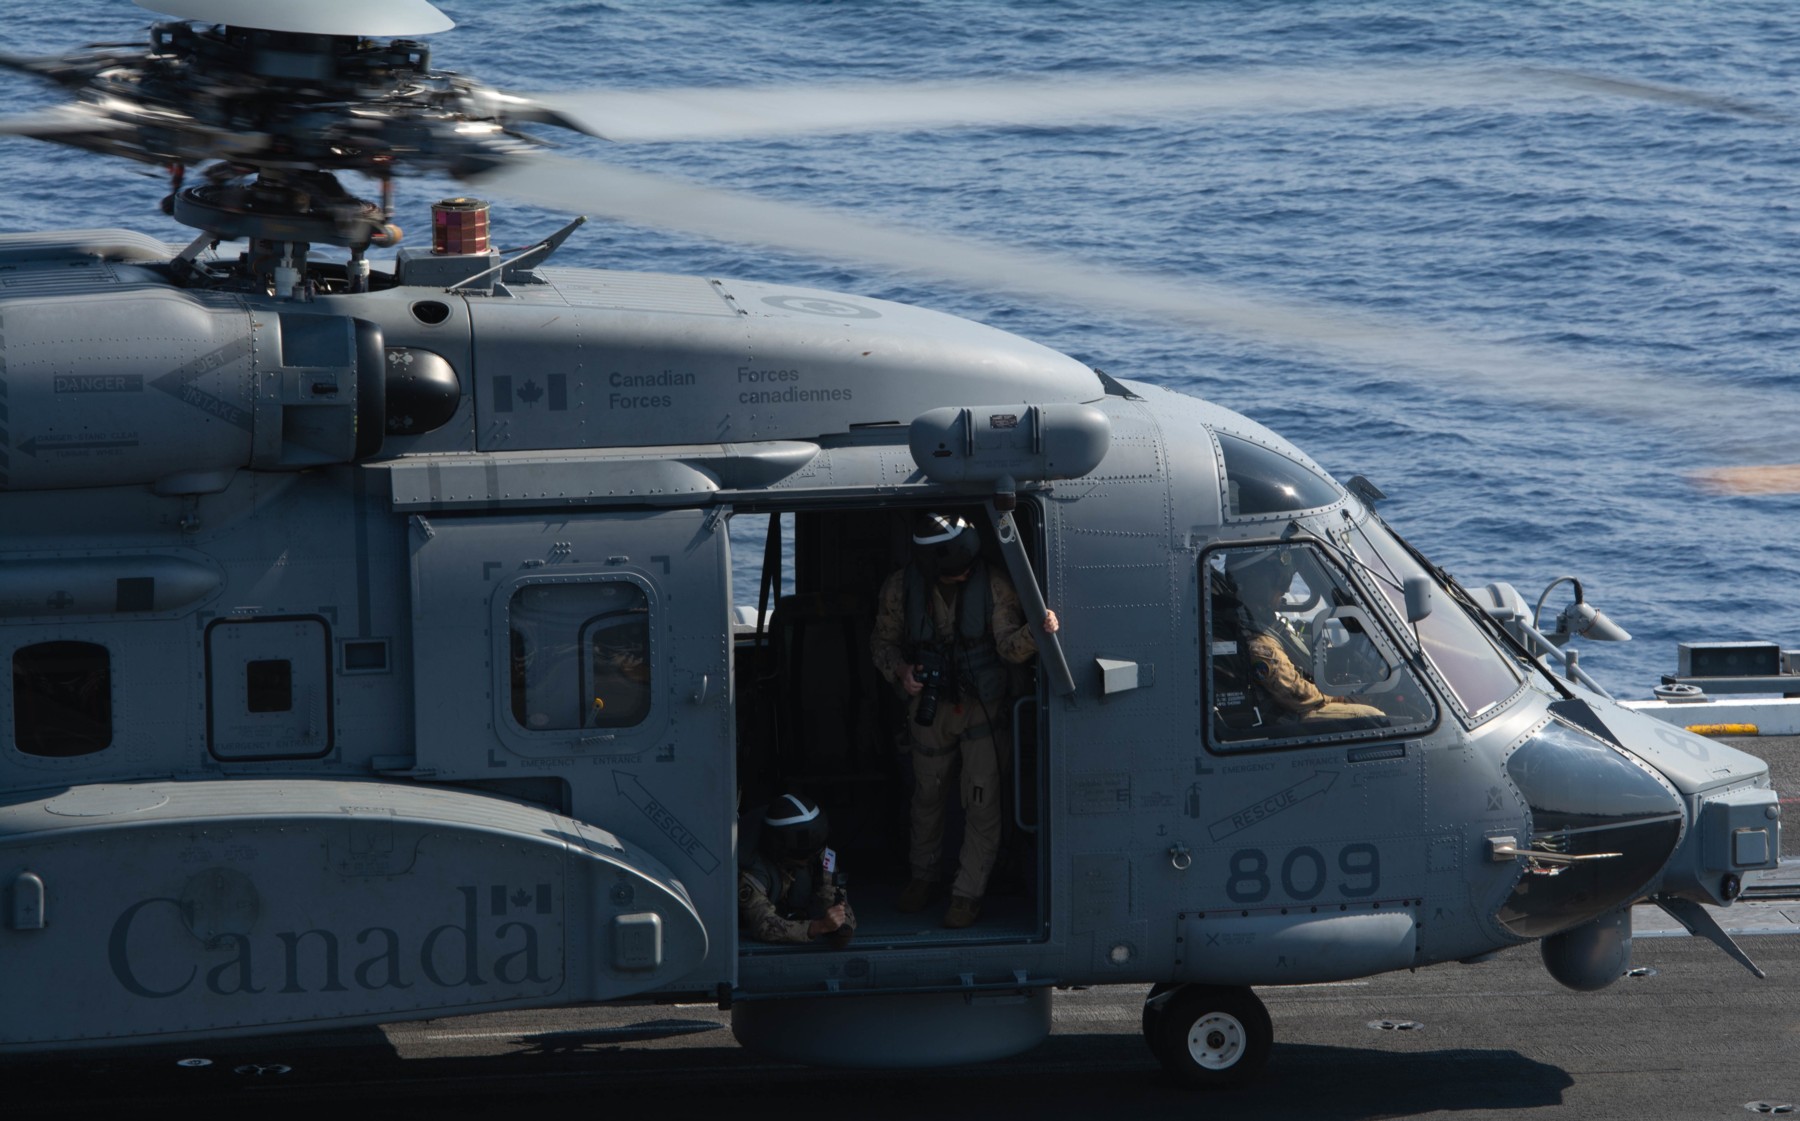 ch-148 cyclone naval helicopter royal canadian air force navy rcaf sikorsky hmcs 406 423 443 maritime squadron 10